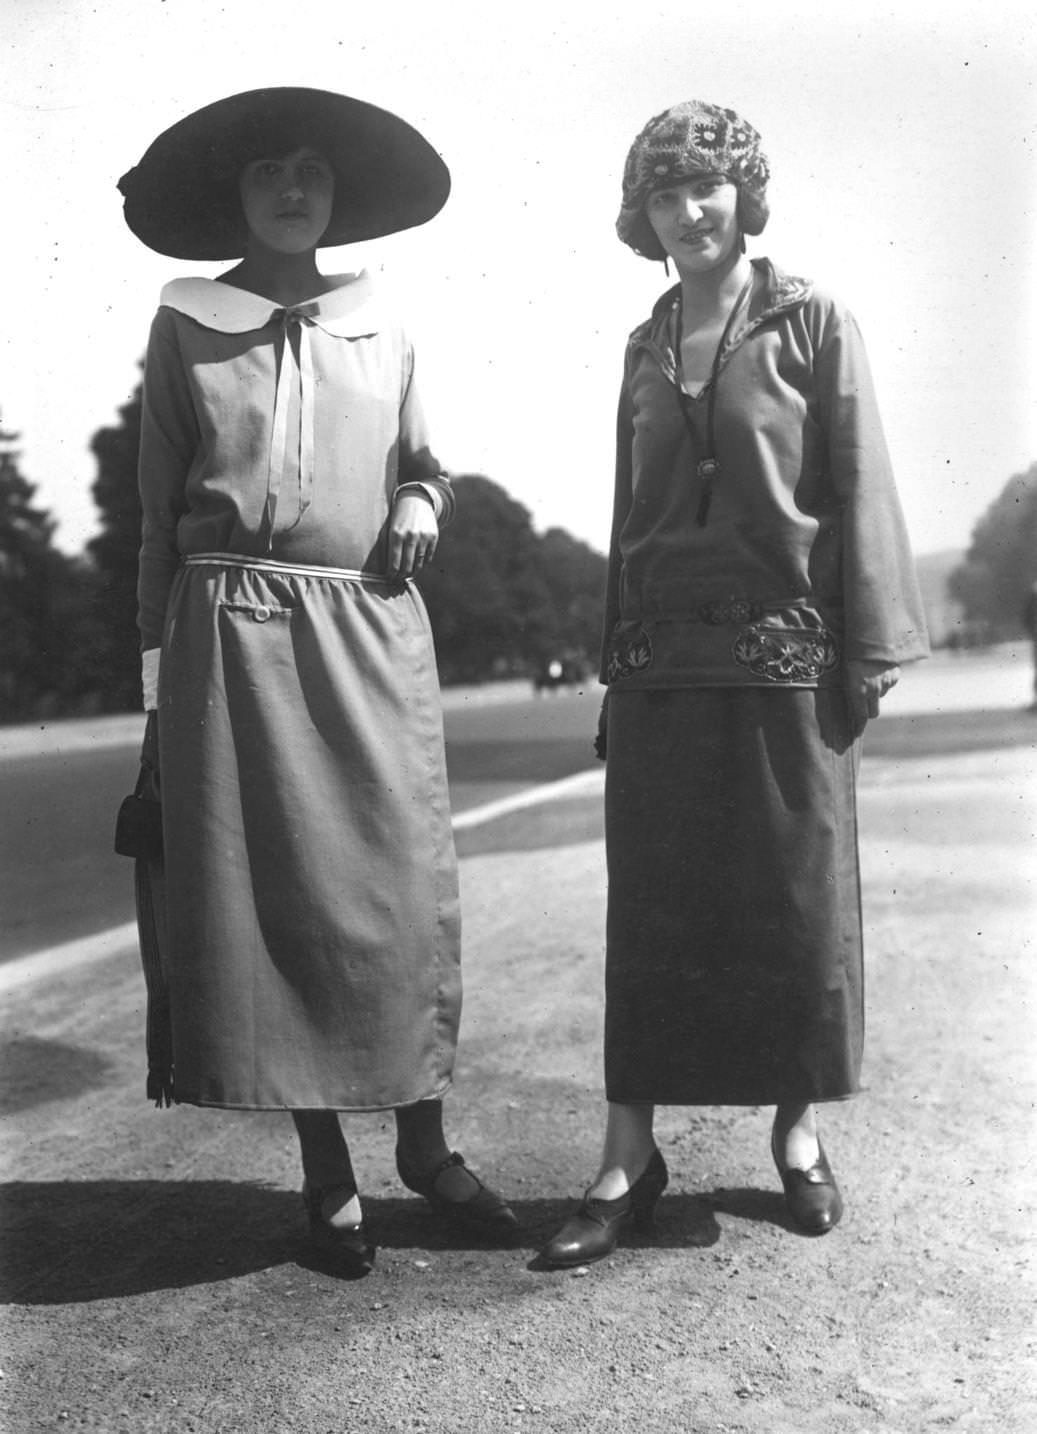 The woman on the right wears a variation of the classic sailor suit, with the waistline sitting on the hips, topped with a cloche hat, 1923